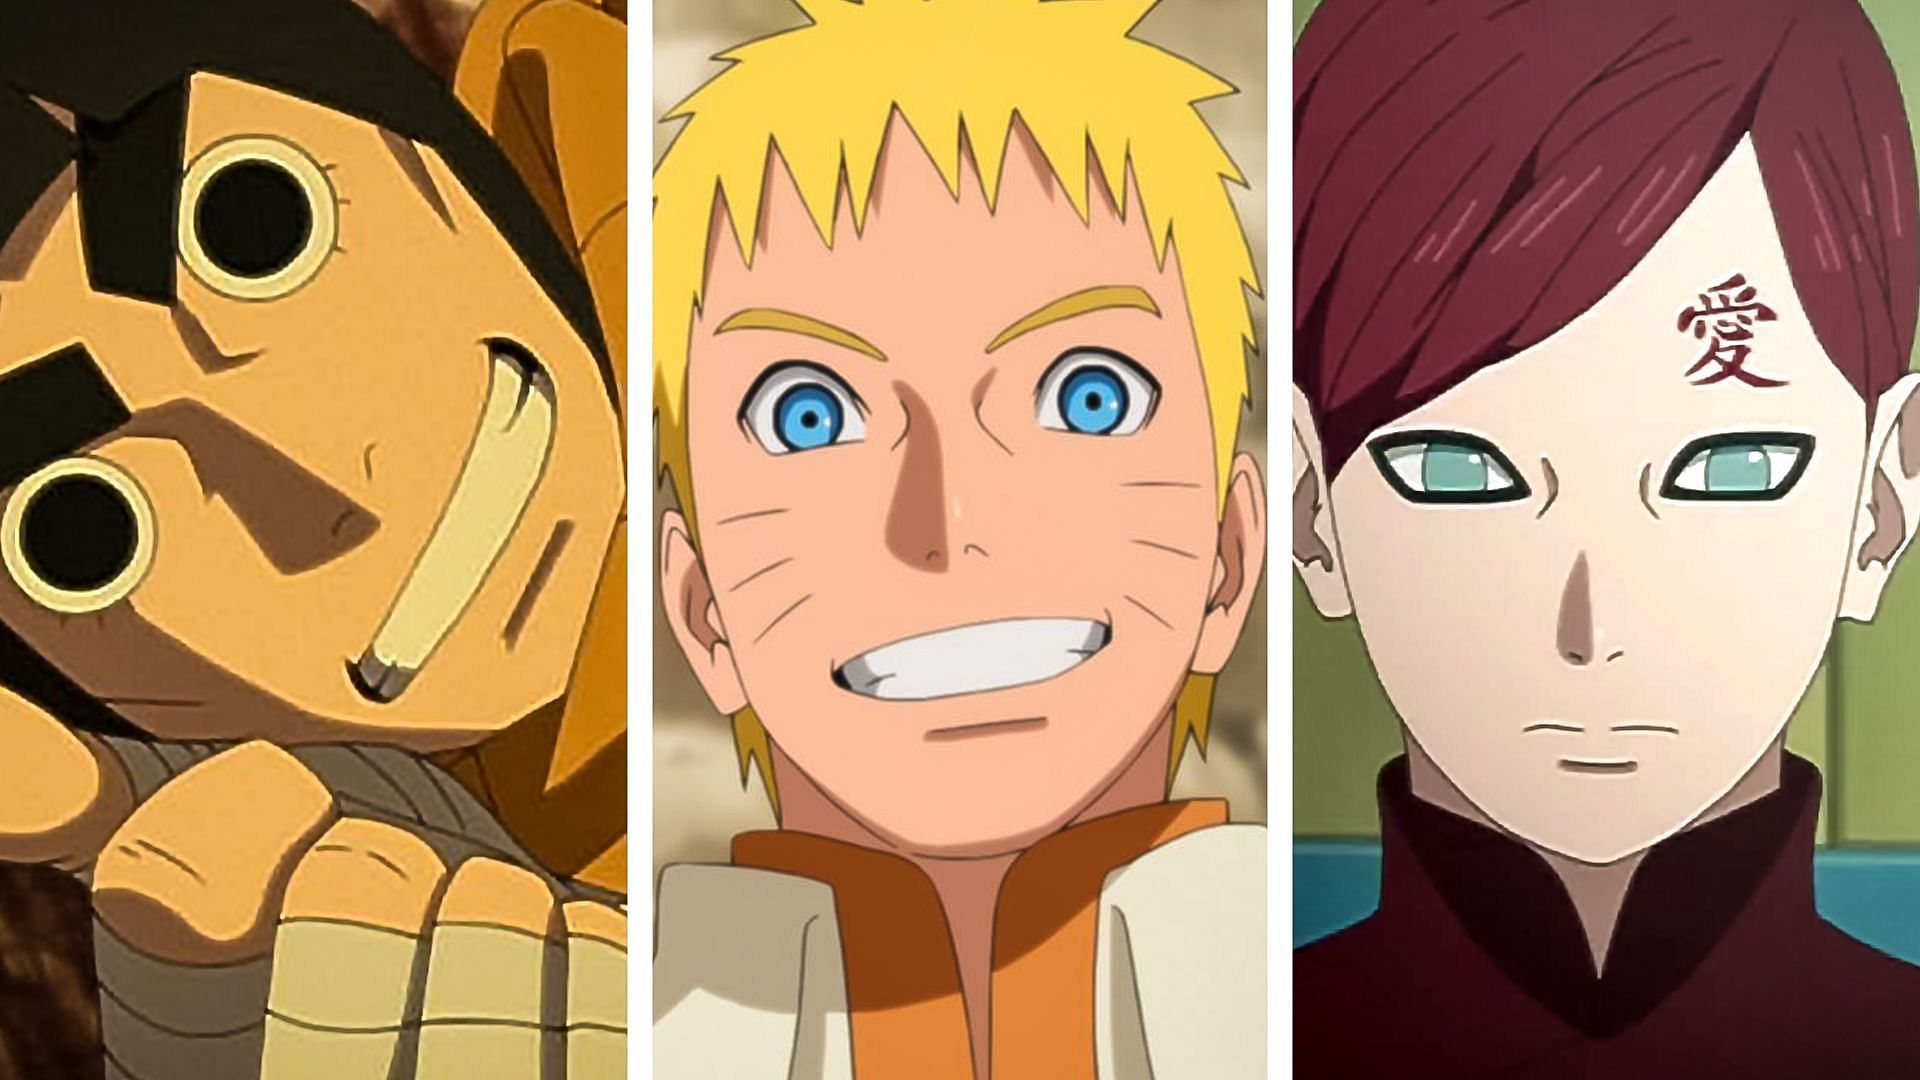 Age of important Naruto characters in Boruto